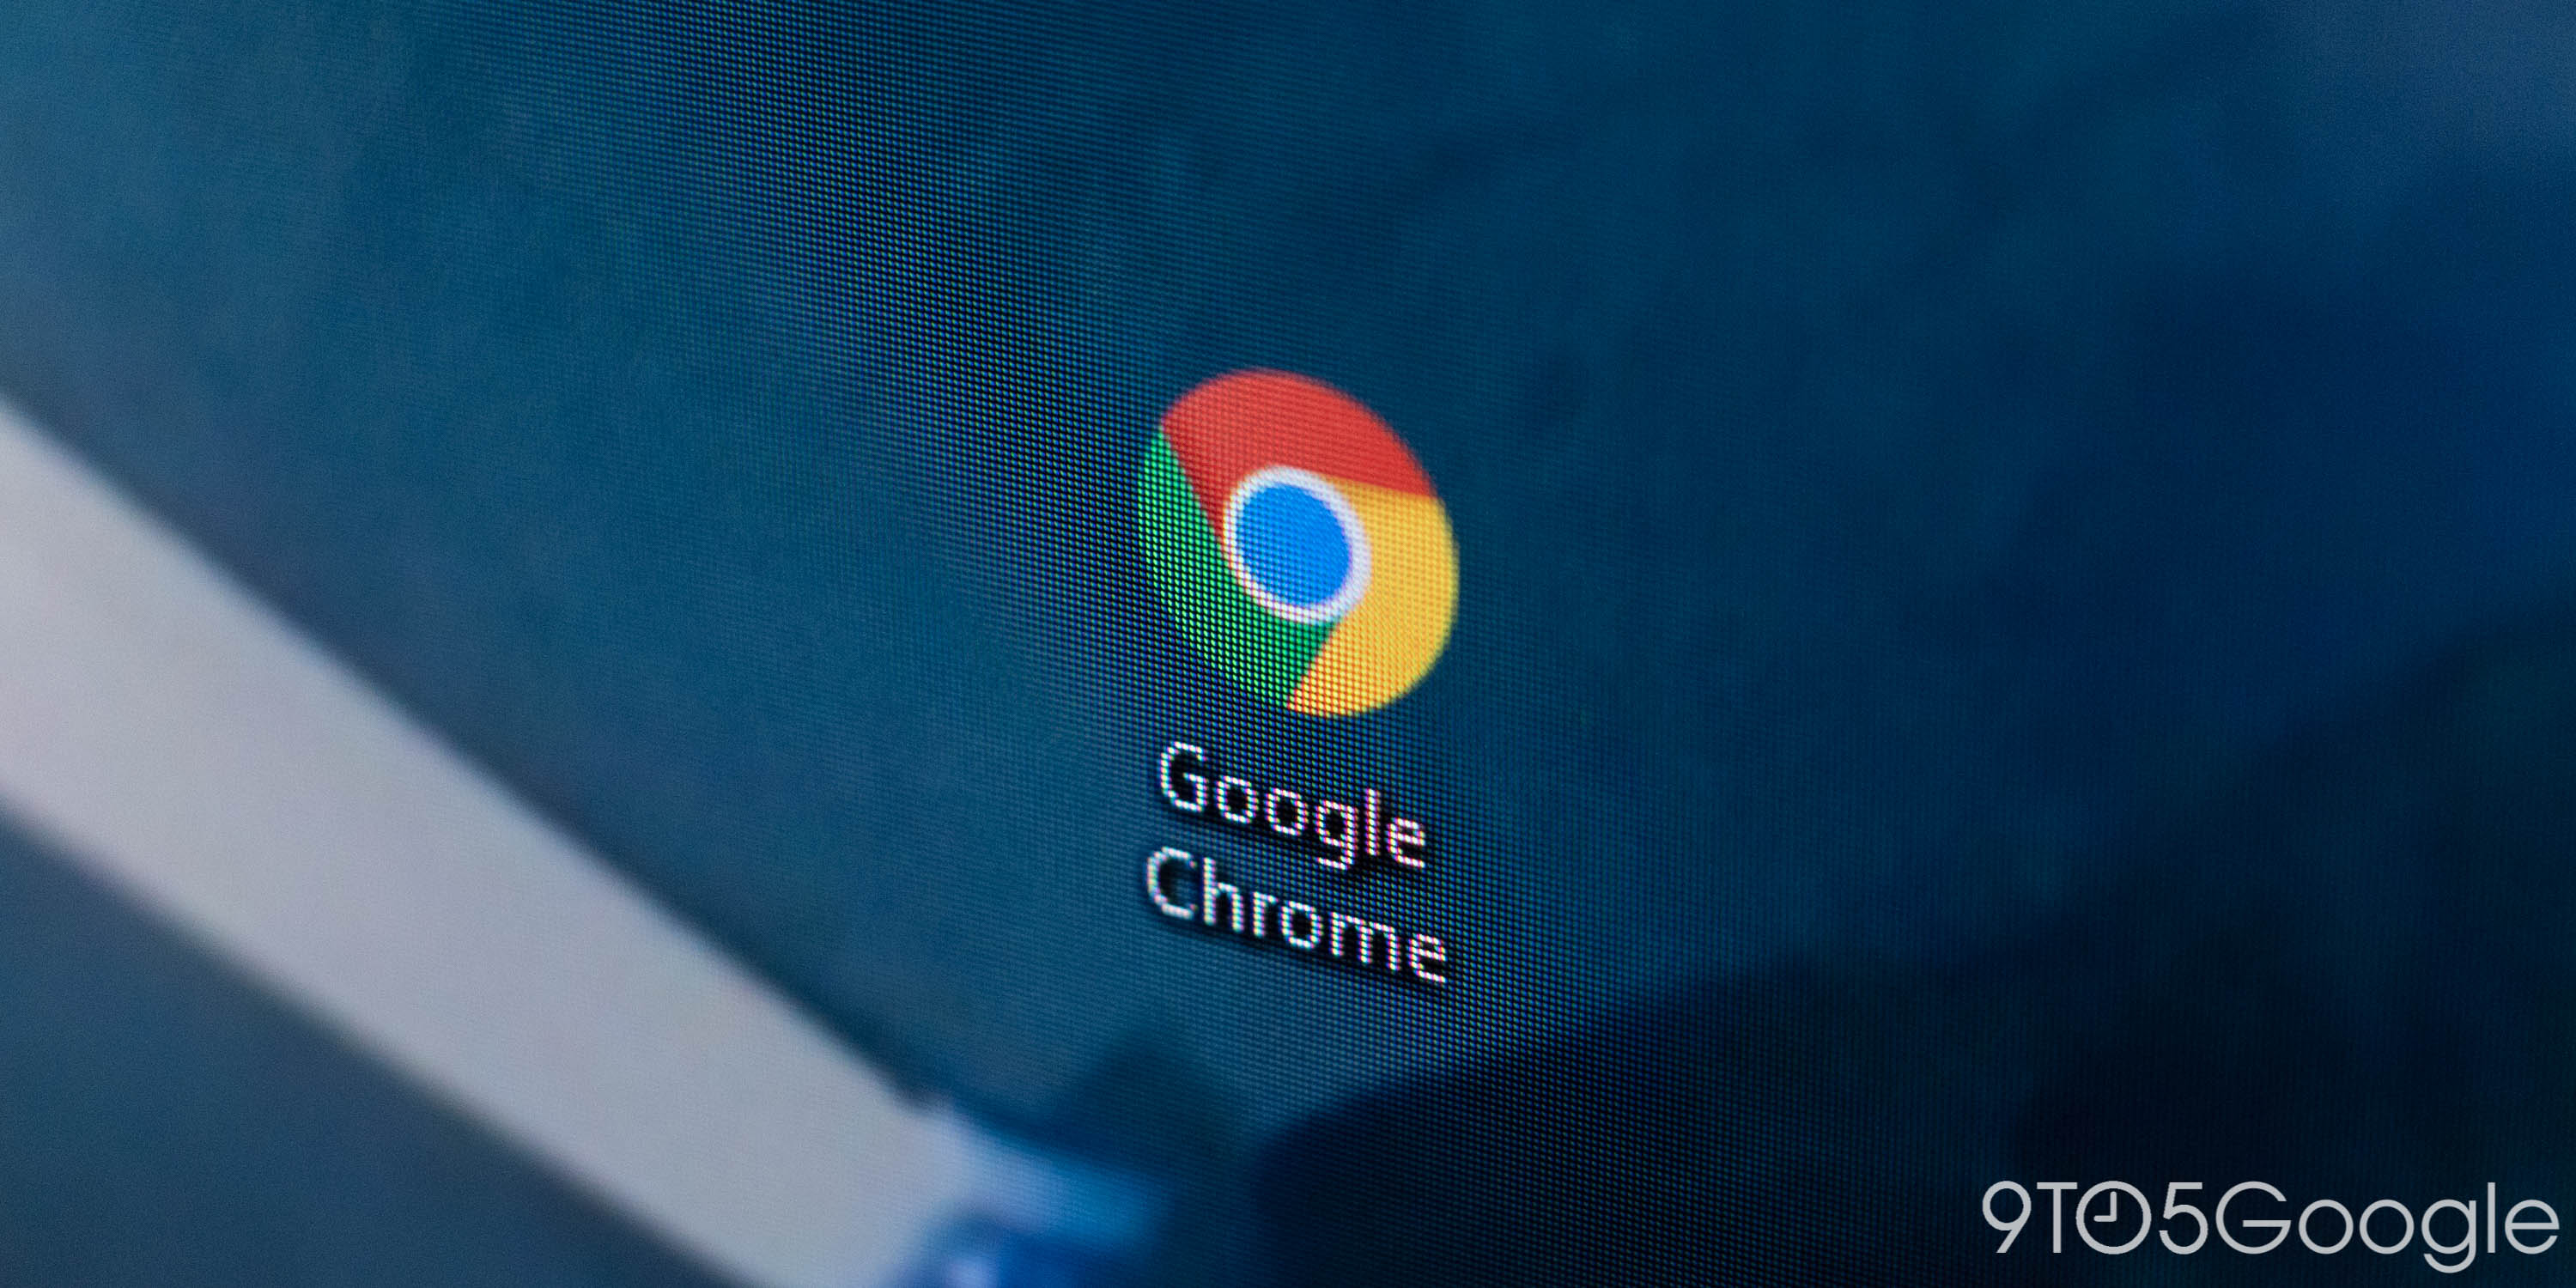 Google Chrome gains dynamic color theme based on background